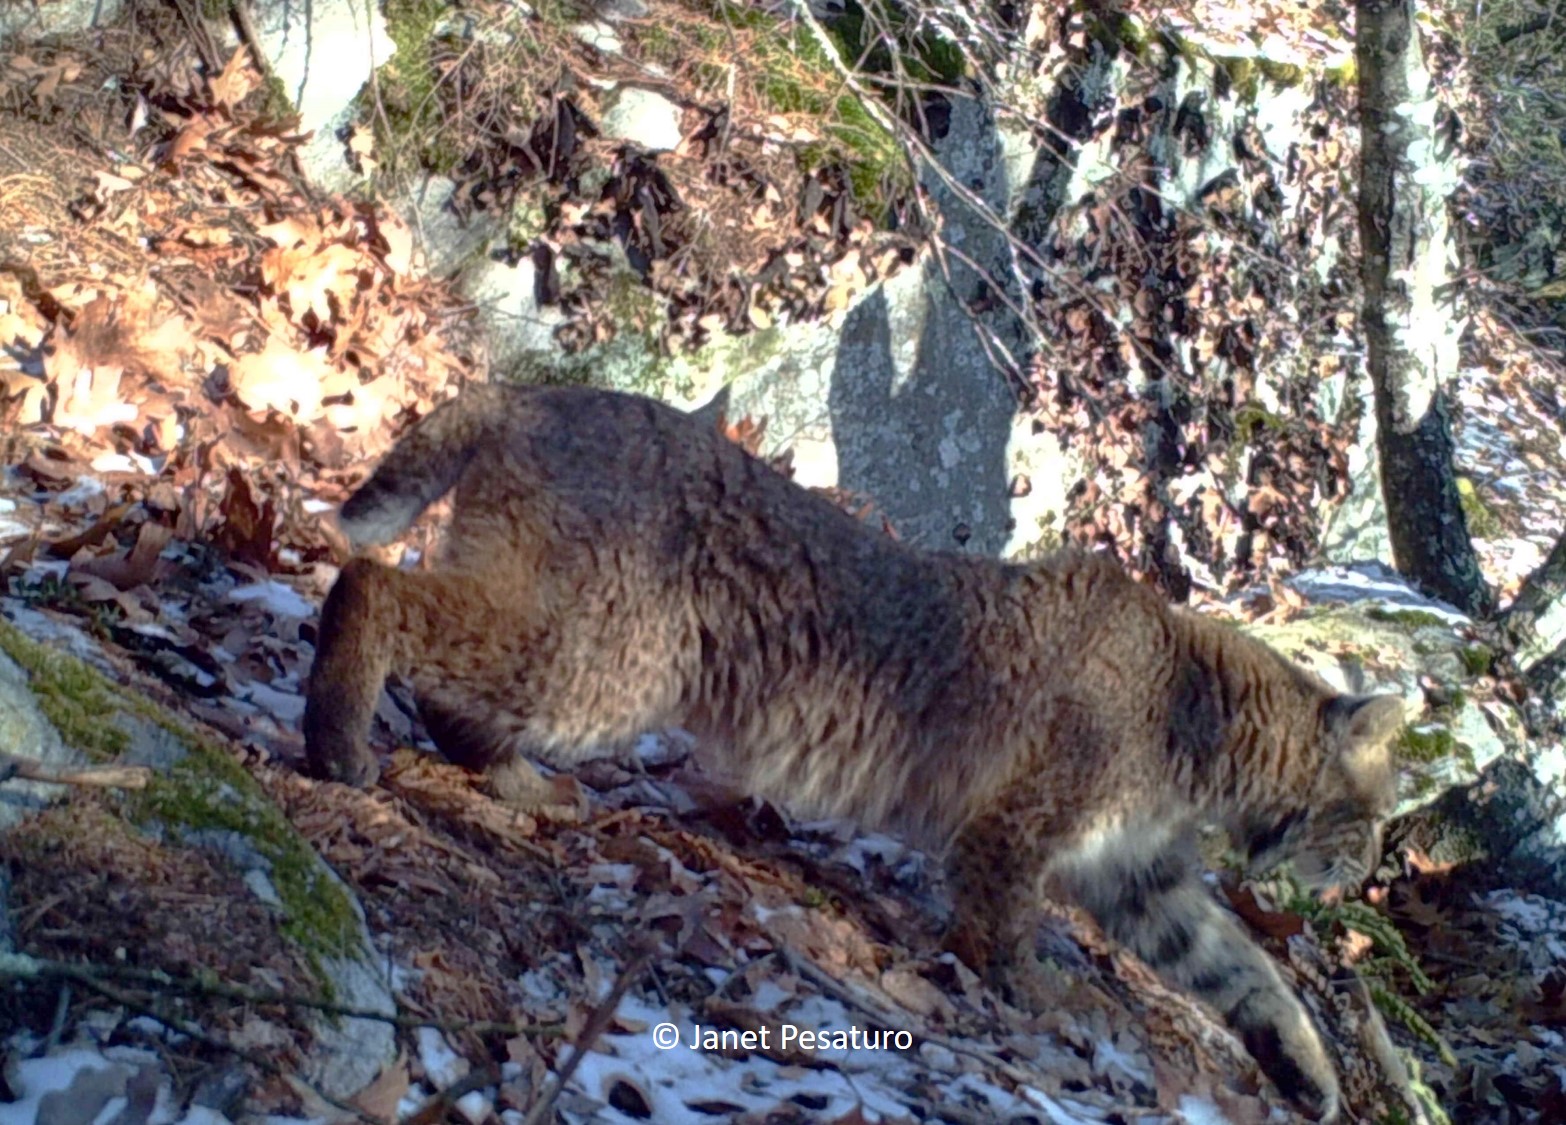 bobcat coat coloration in this case looks grayer in the morning light